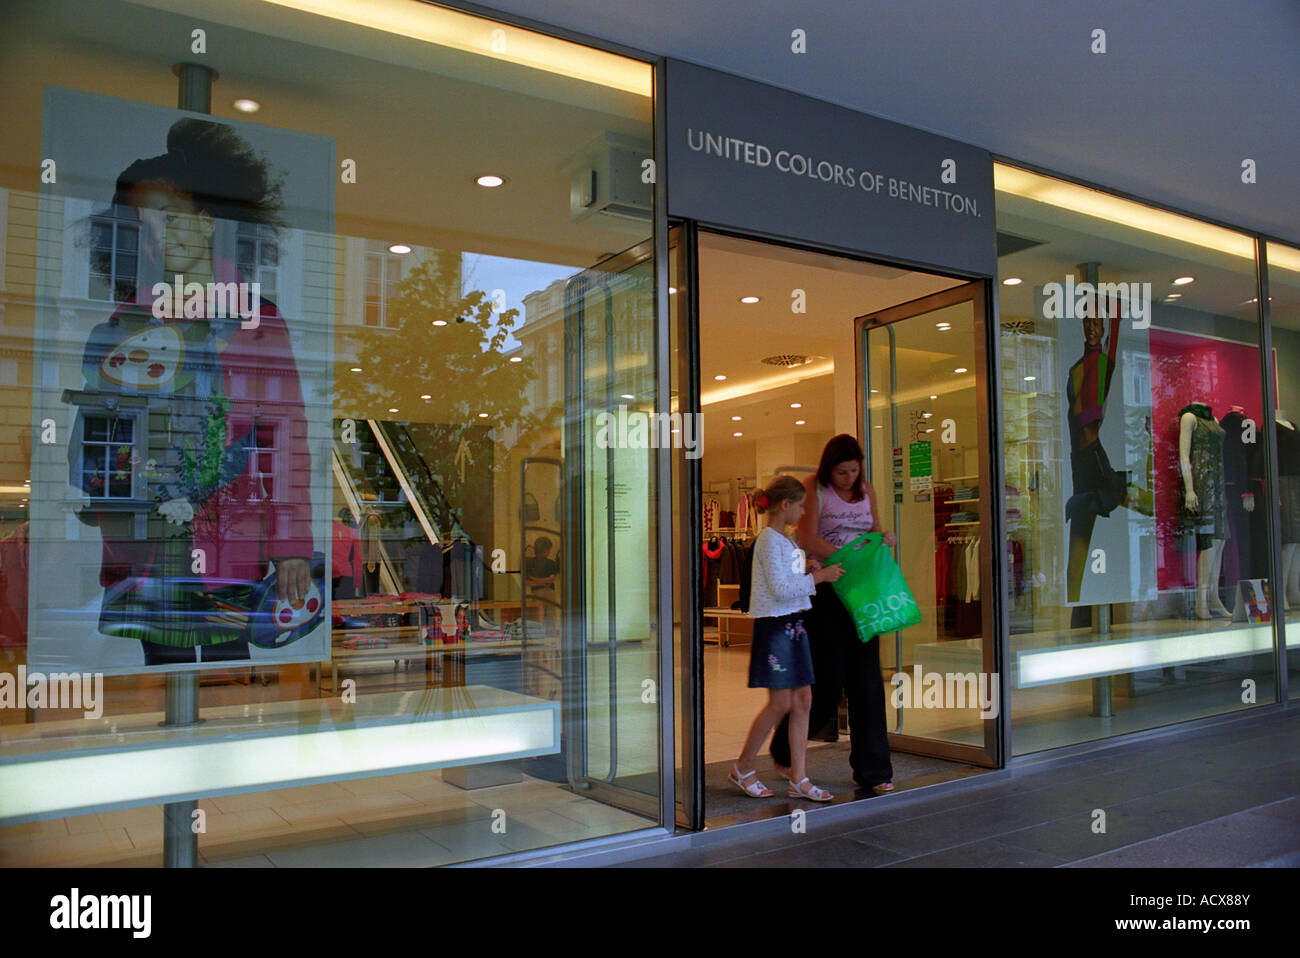 United Colors of Benetton shop in Vilnius, Lithuania Stock Photo - Alamy